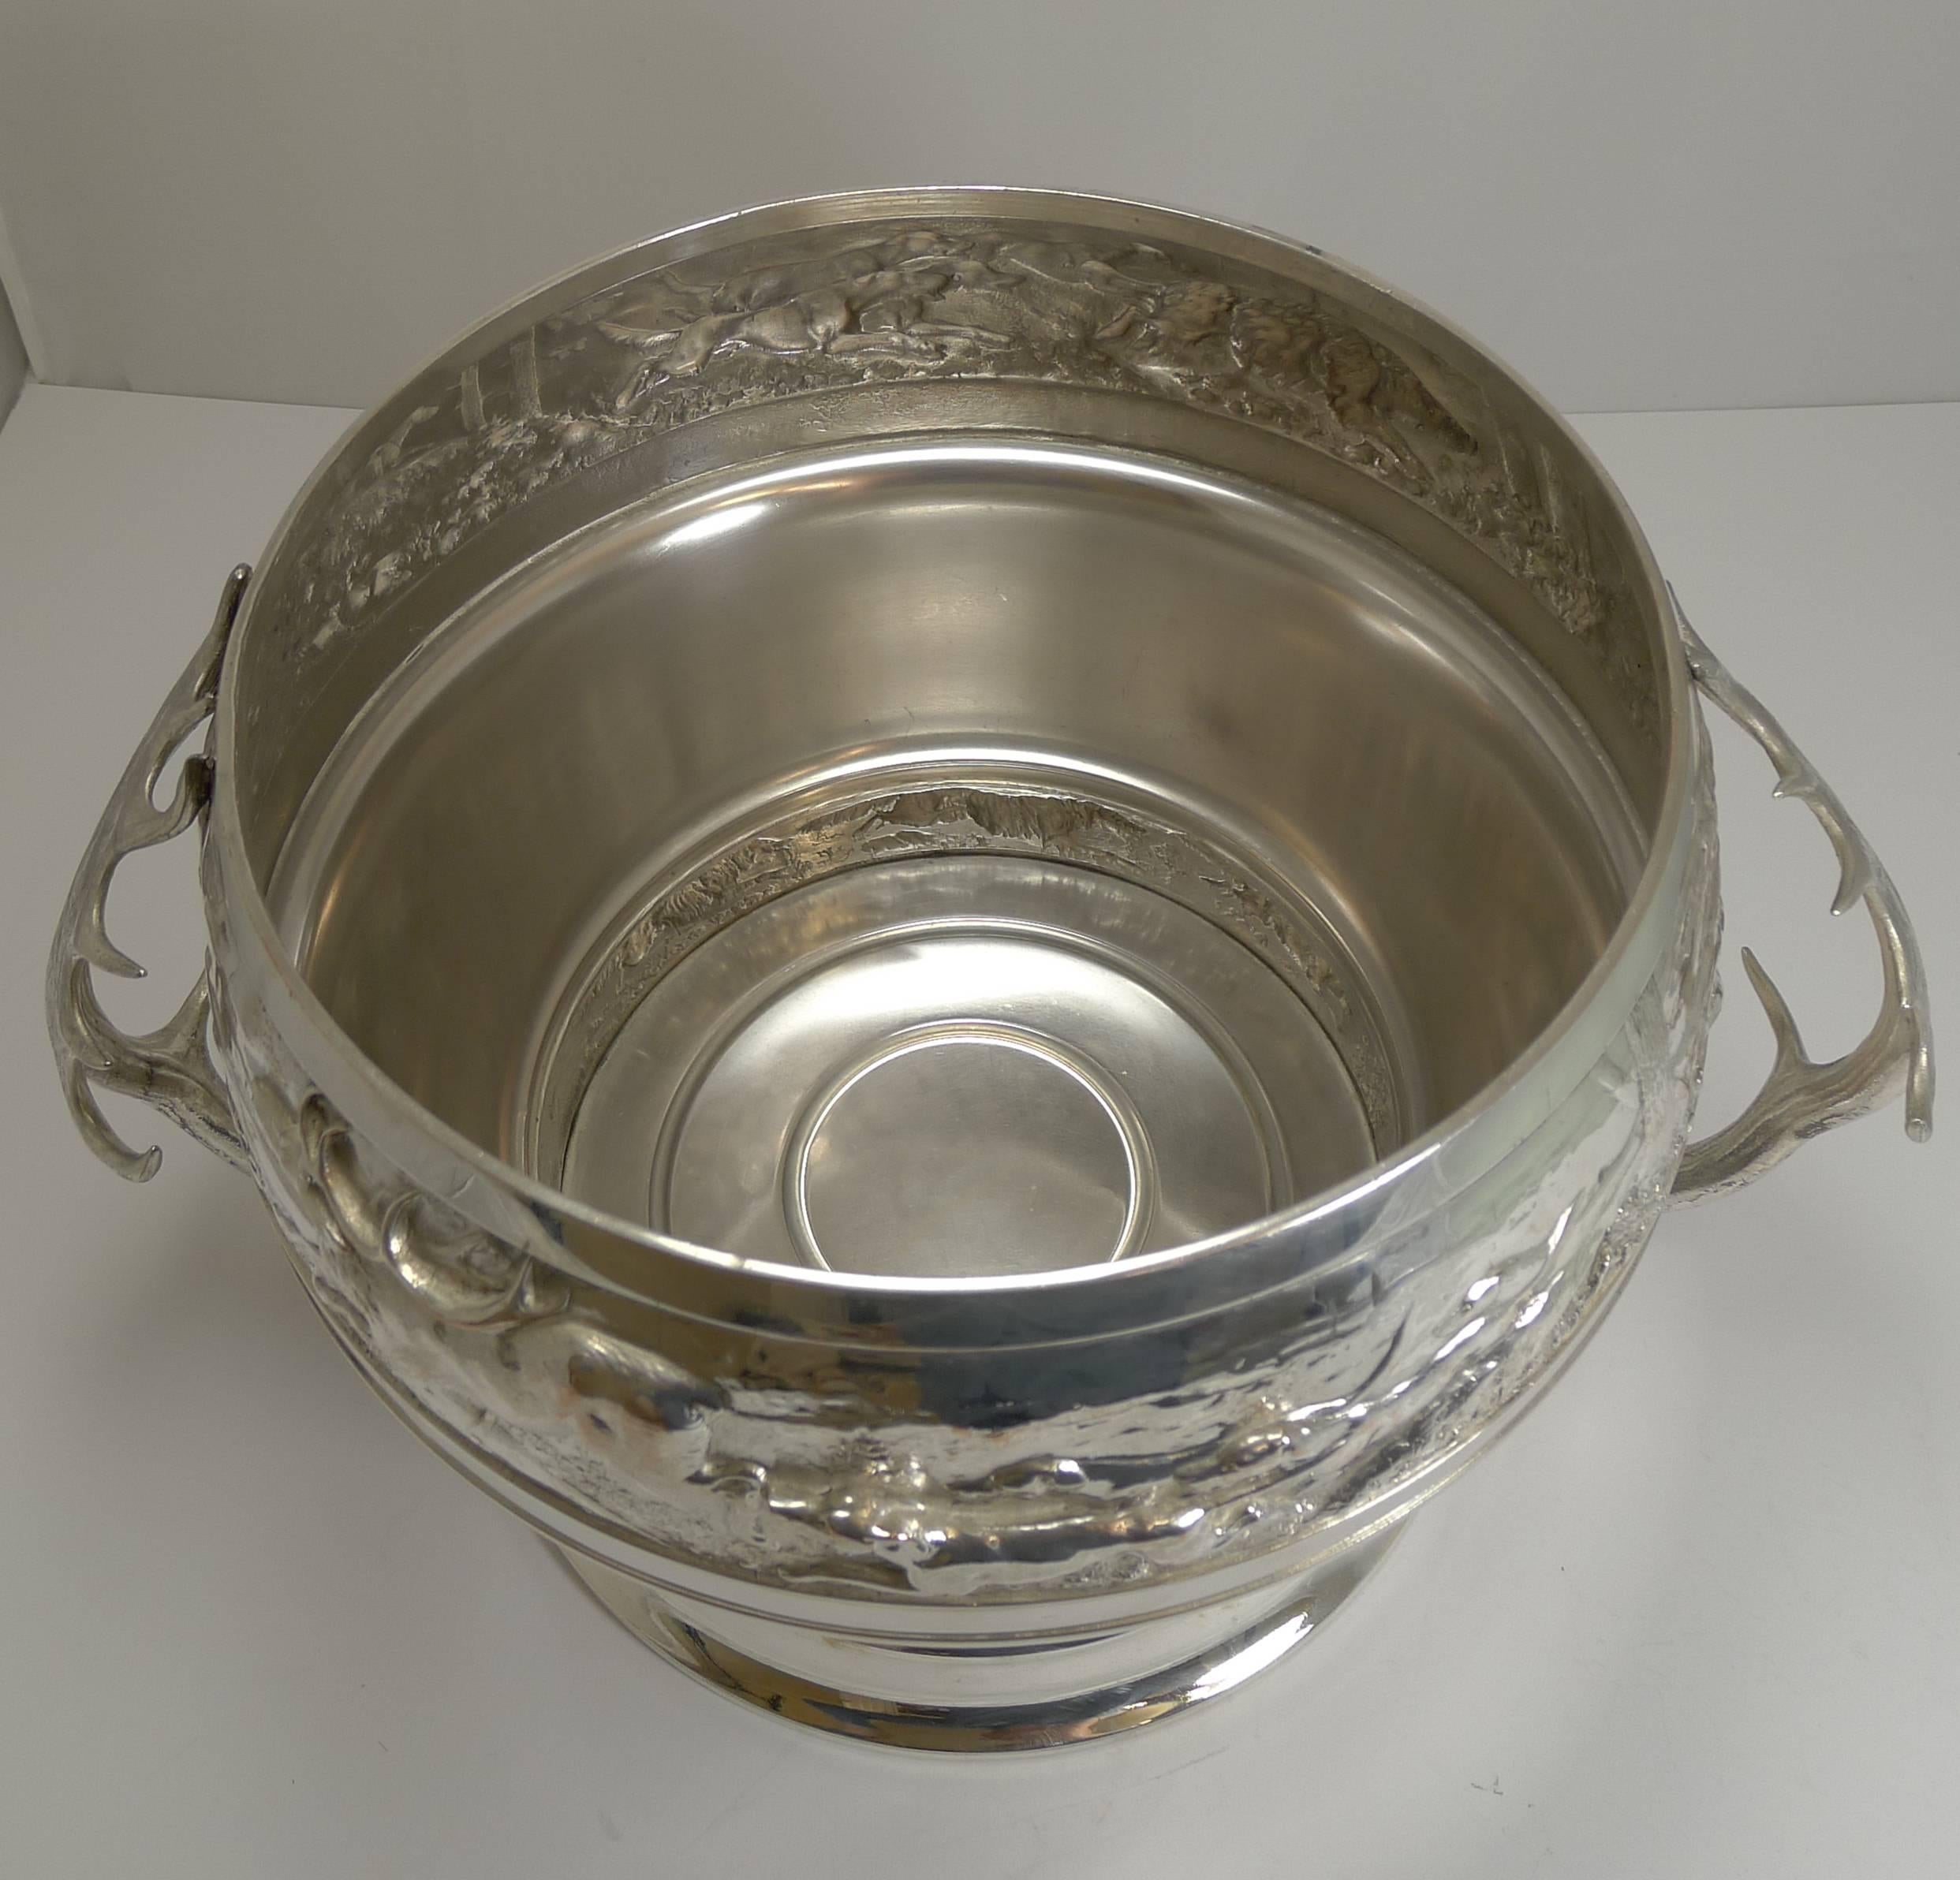 20th Century Grand Silver Plated Hunting Tureen by WMF, circa 1920, Signed